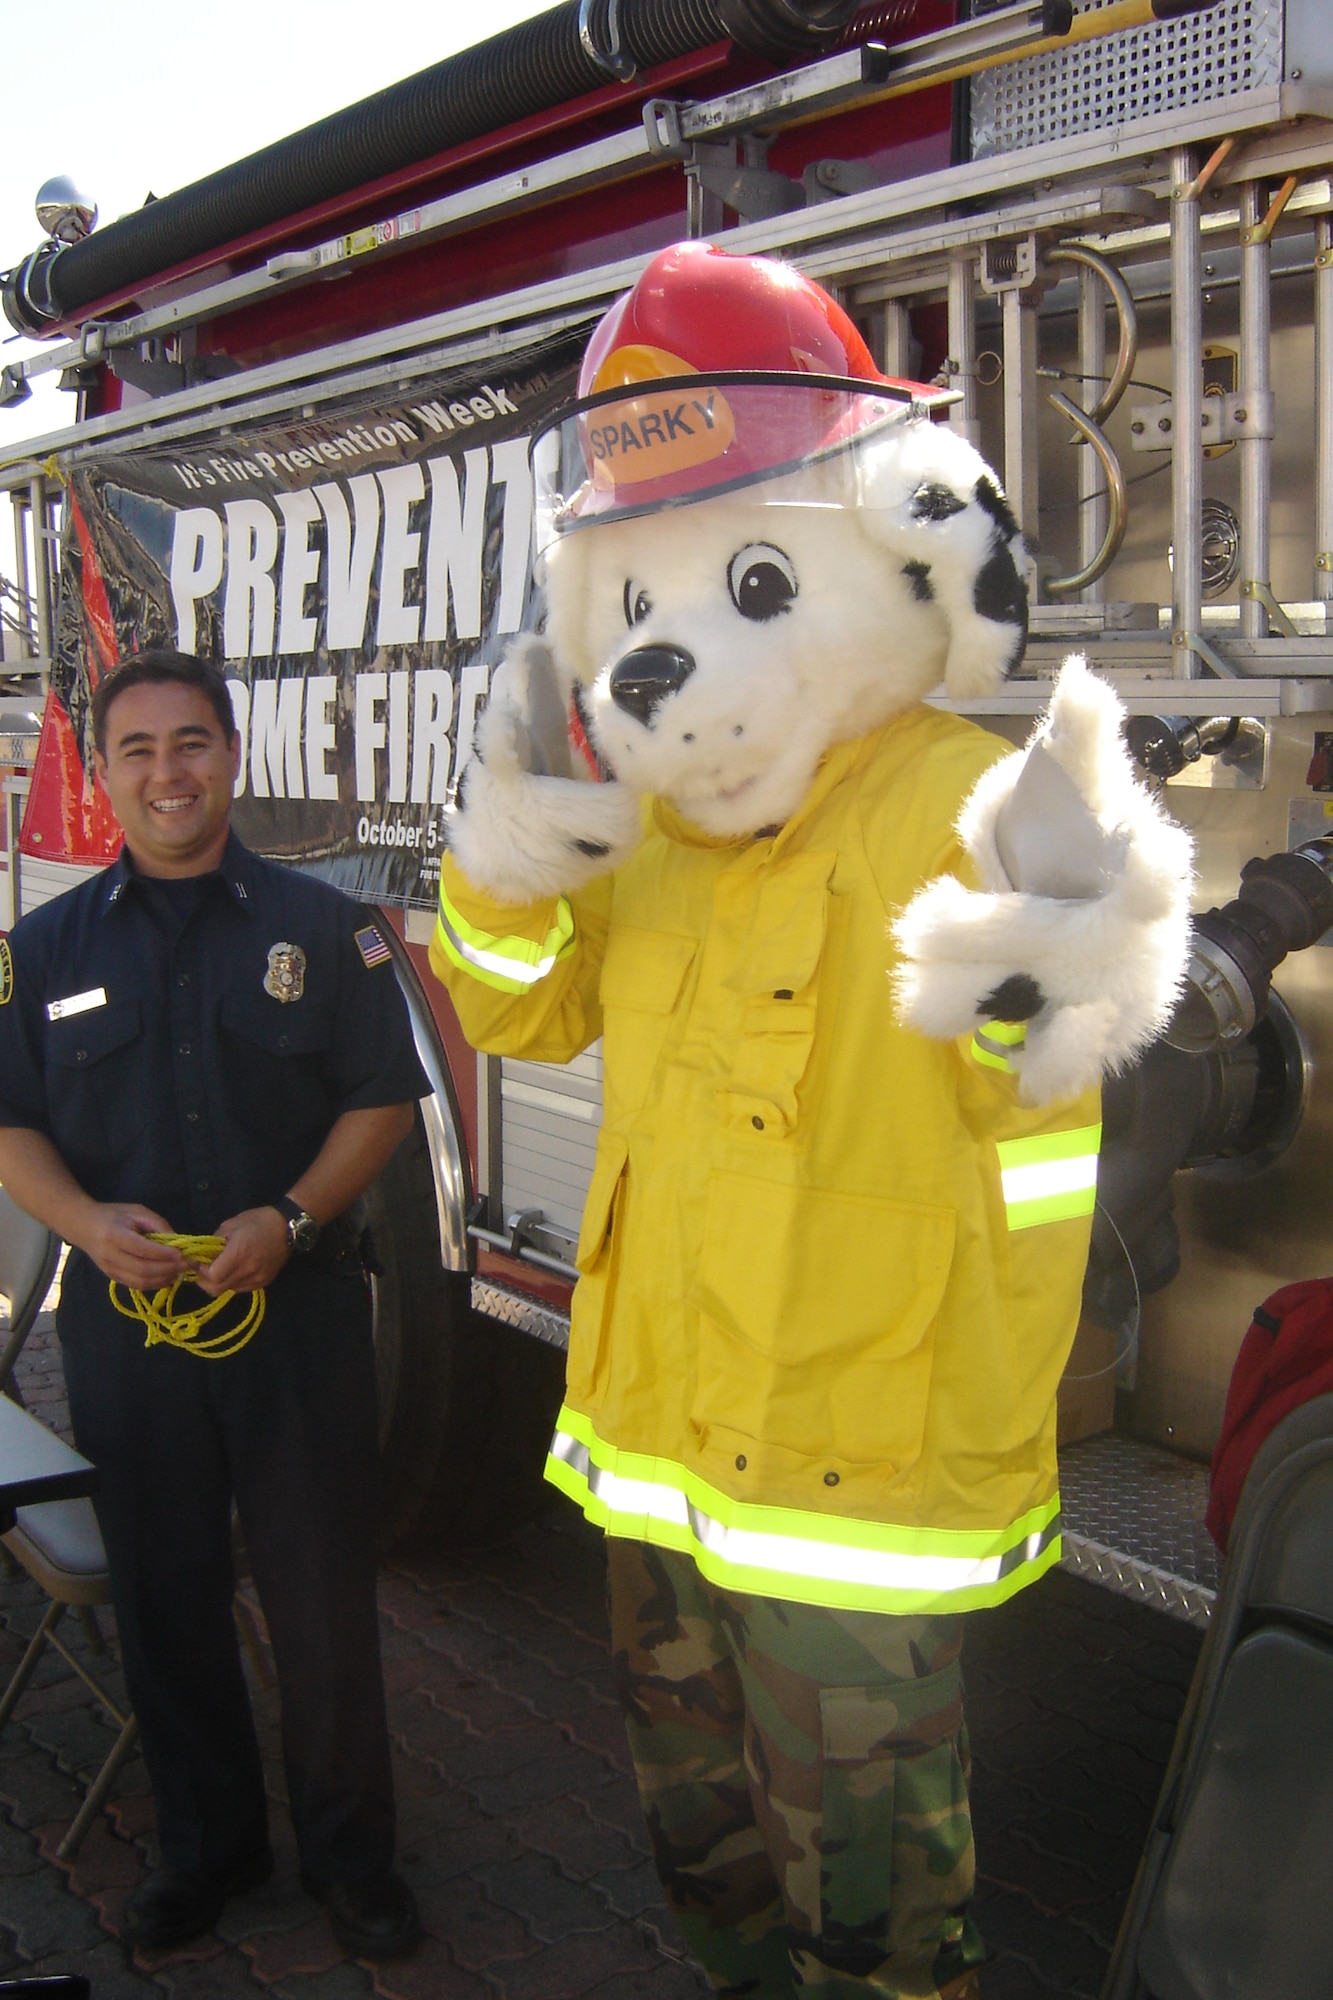 Sparky the Fire Dog stands with Capt. Ben Worley, March ARB Fire Department, in front of the BX, Oct. 9, to give out information about Fire Prevention Week. (U.S. Air Force photos by photos by Will Alexander)